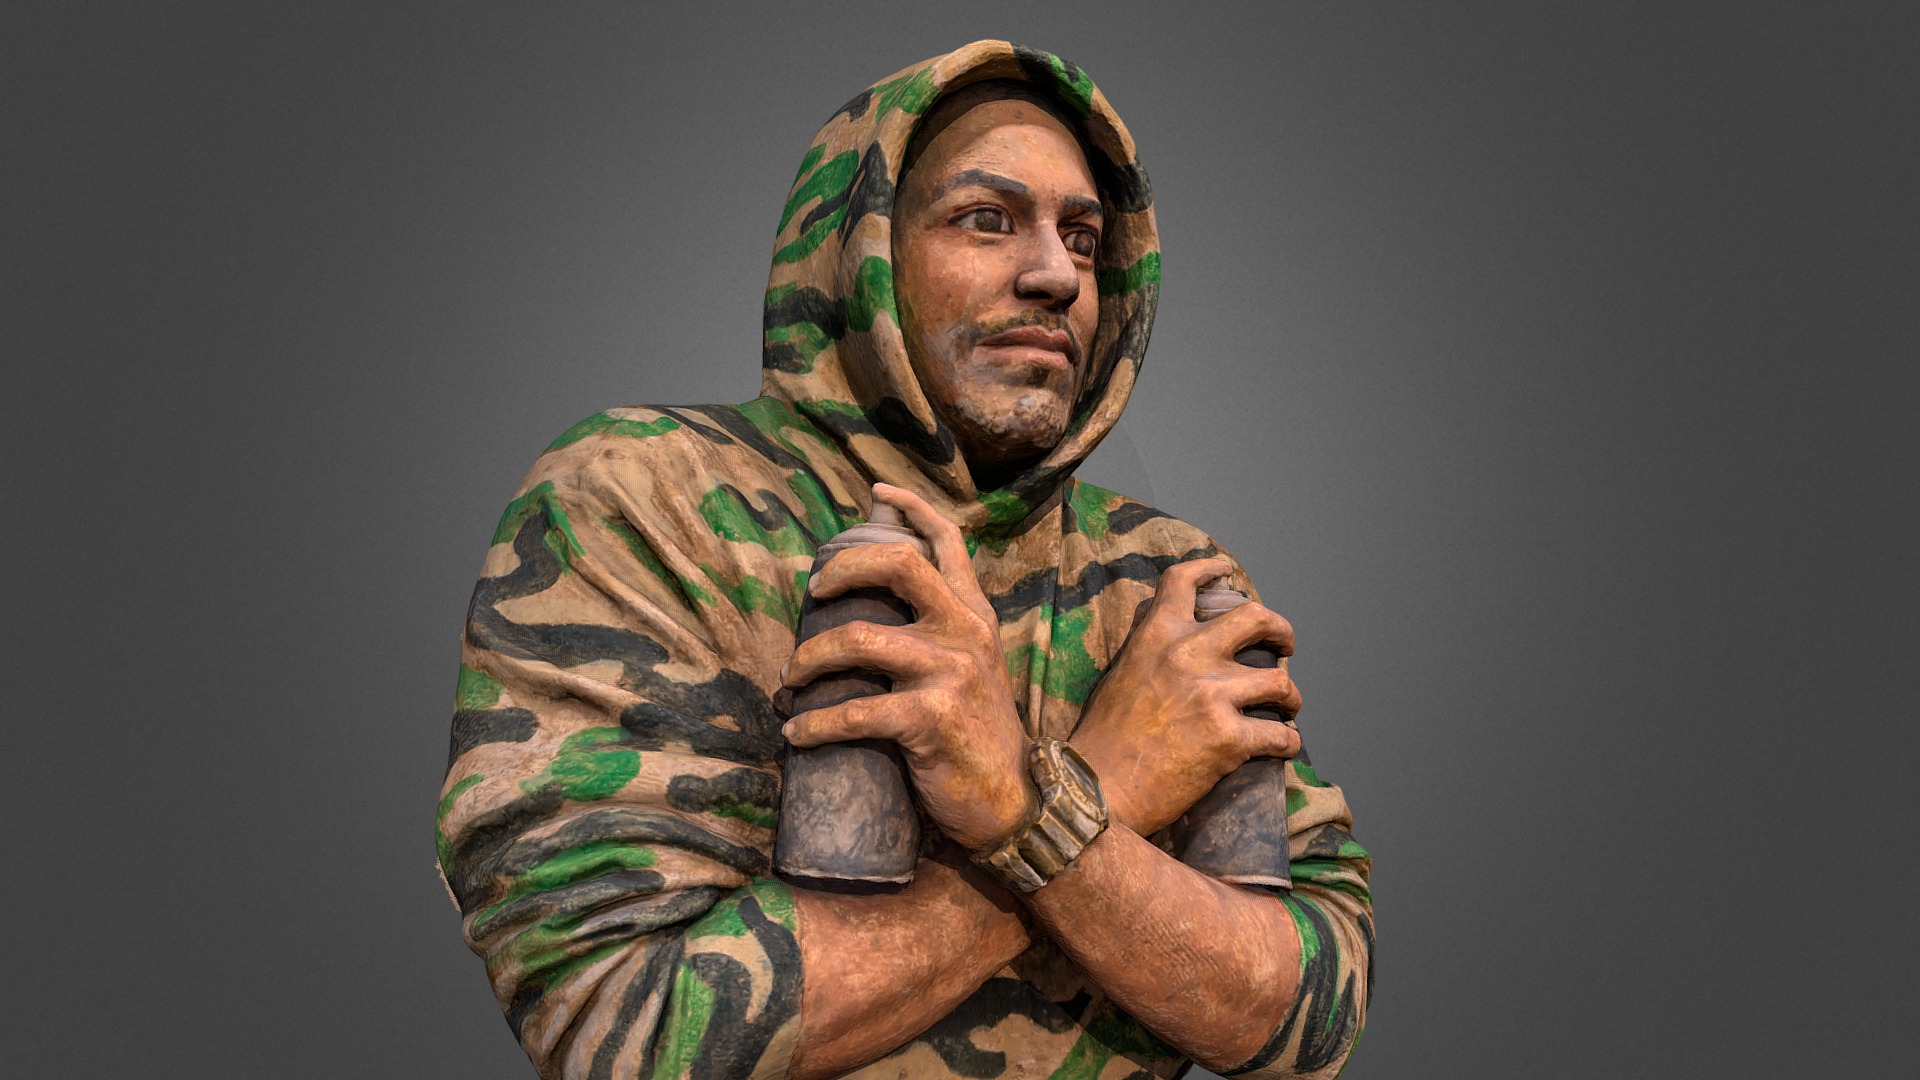 3D model Graffiti Artist,  paper mache bust sculpture - This is a 3D model of the Graffiti Artist,  paper mache bust sculpture. The 3D model is about a man with his hands together.